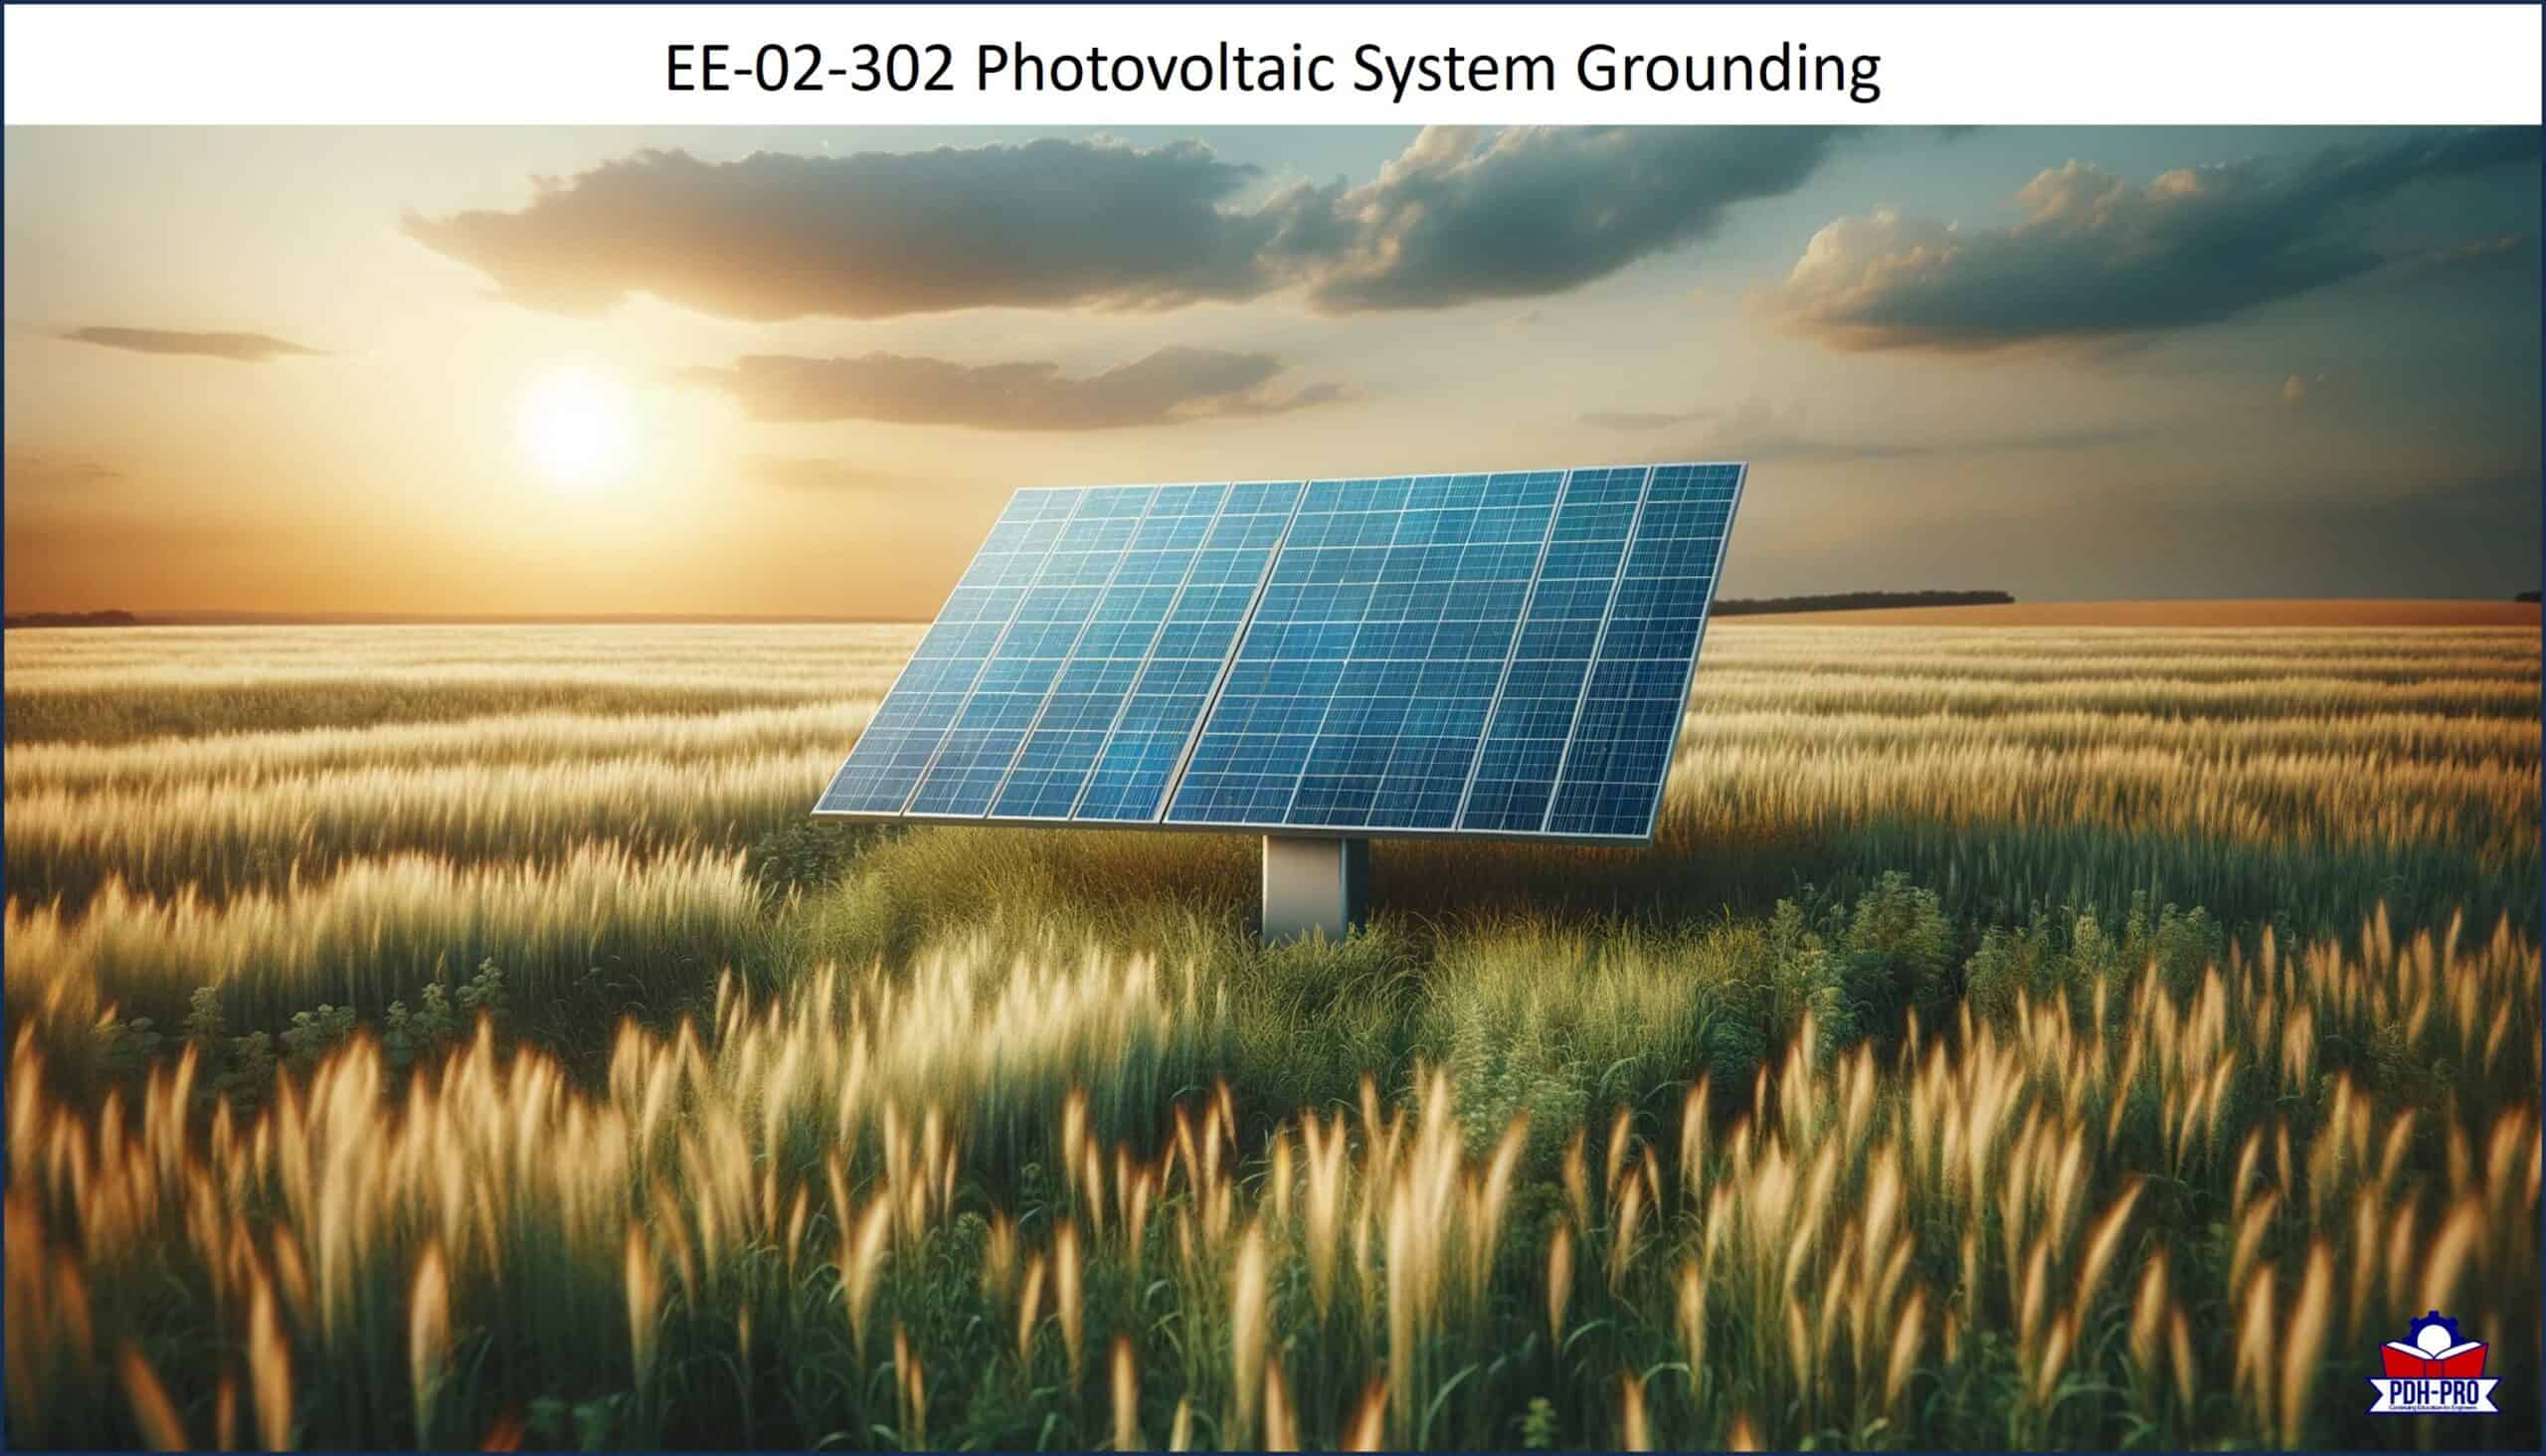 Photovoltaic System Grounding